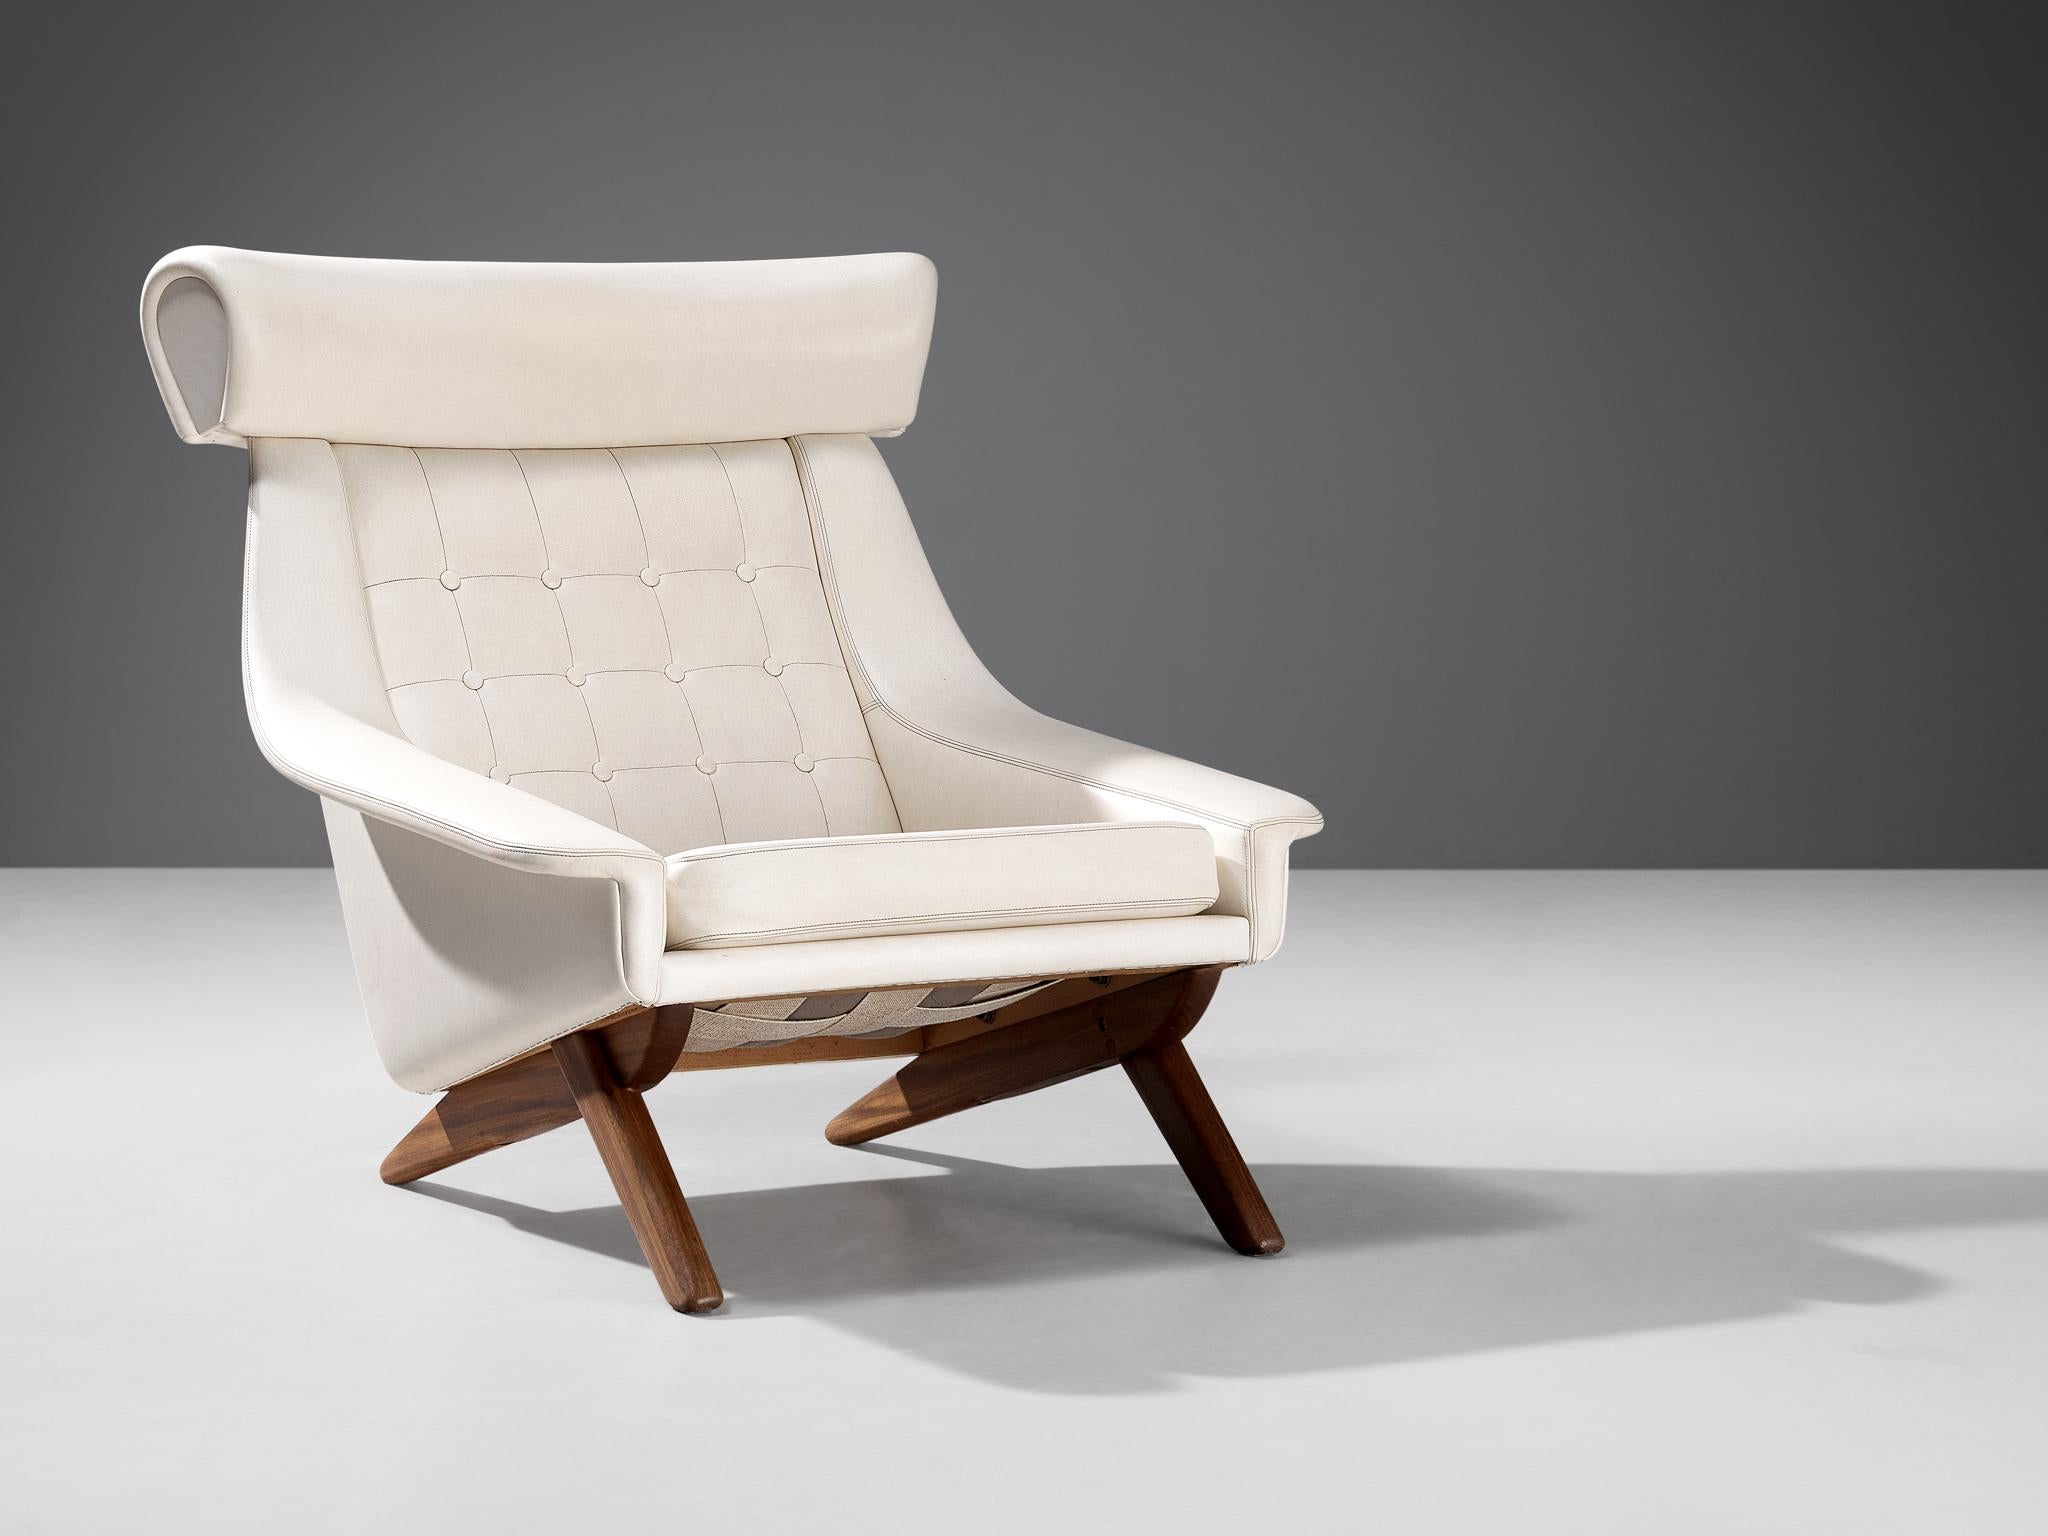 Illum Wikkelsø, lounge chair, leatherette, teak, Denmark 1960s.

Well-designed easy chair in pearlescent white leatherette upholstery  by Danish designer Illum Wikkelsø. This 'Ox Chair' shows some interesting details. For instance, the wide and